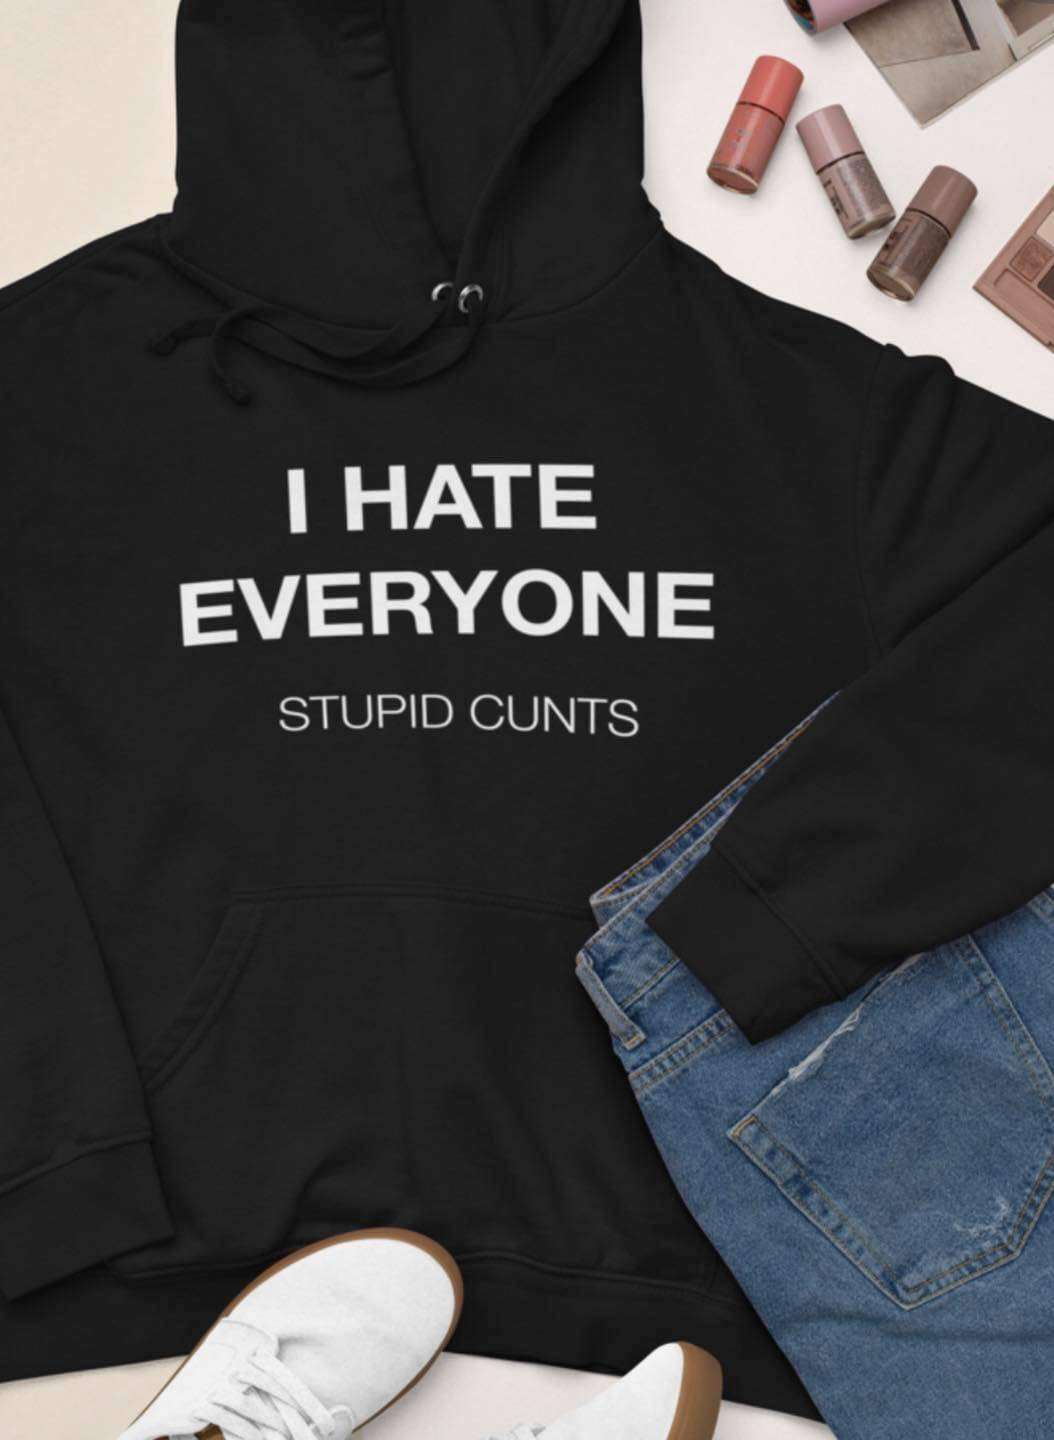 I hate everyone, stupid cunts - Anti social person